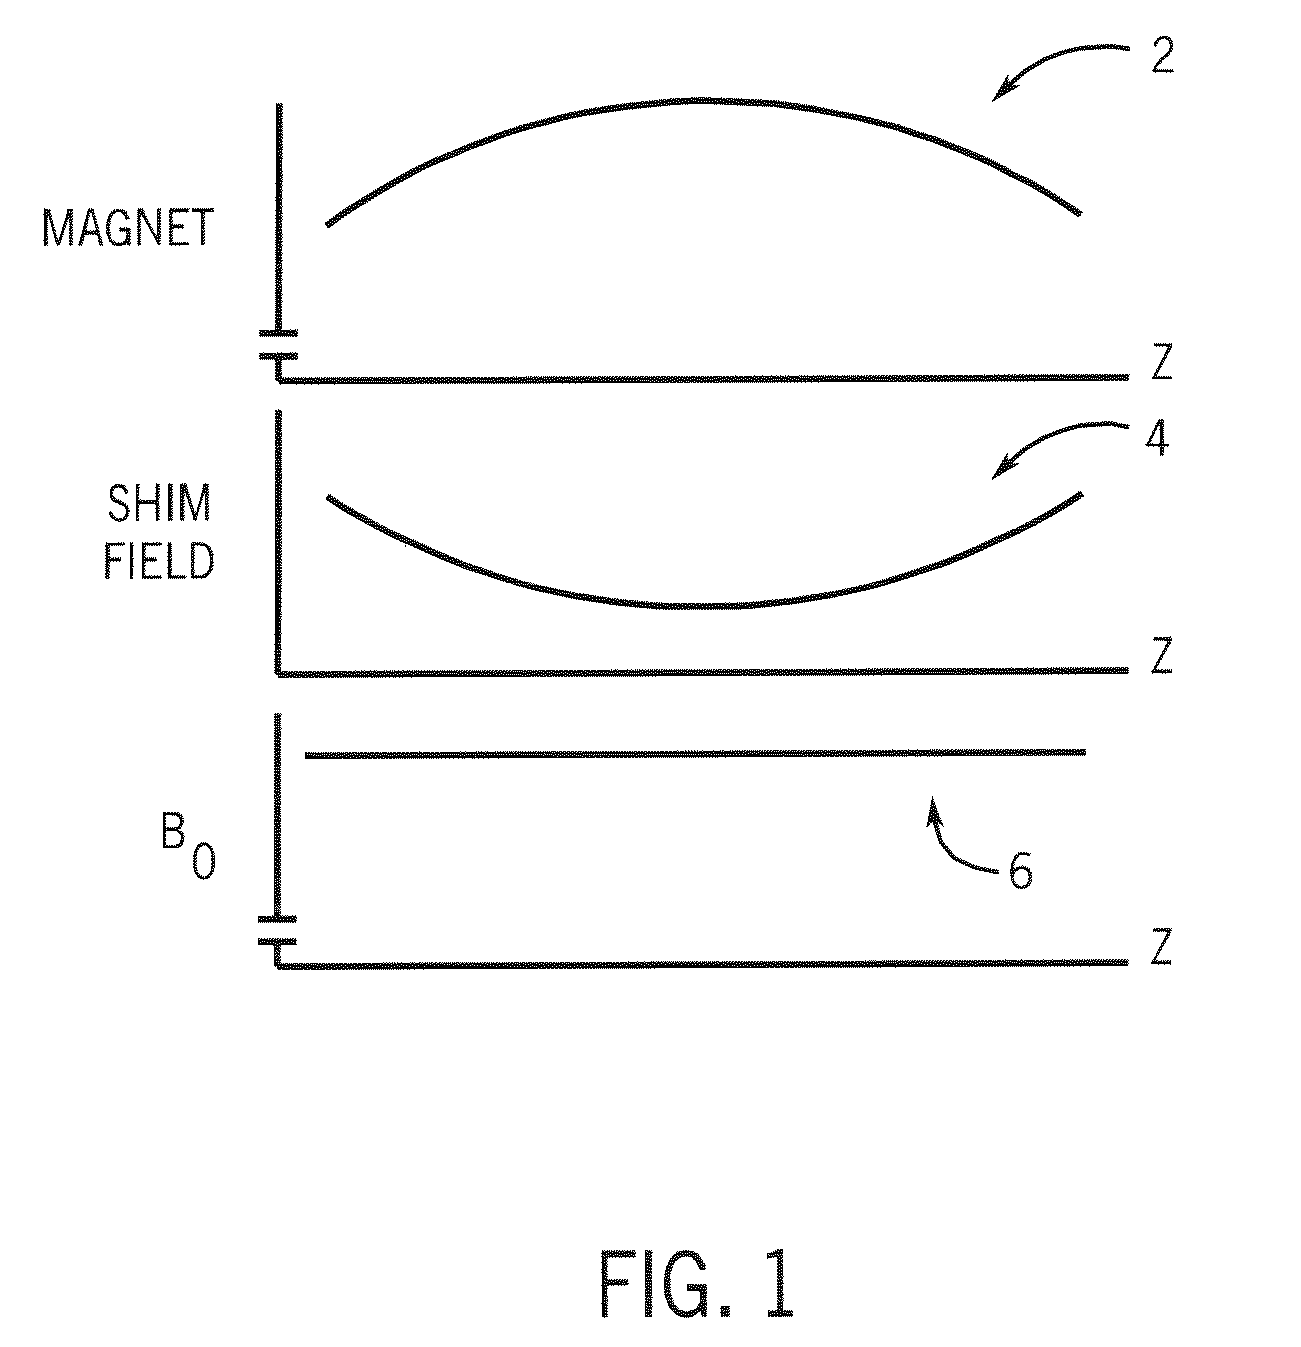 Method of designing a shim coil to reduce field settling time